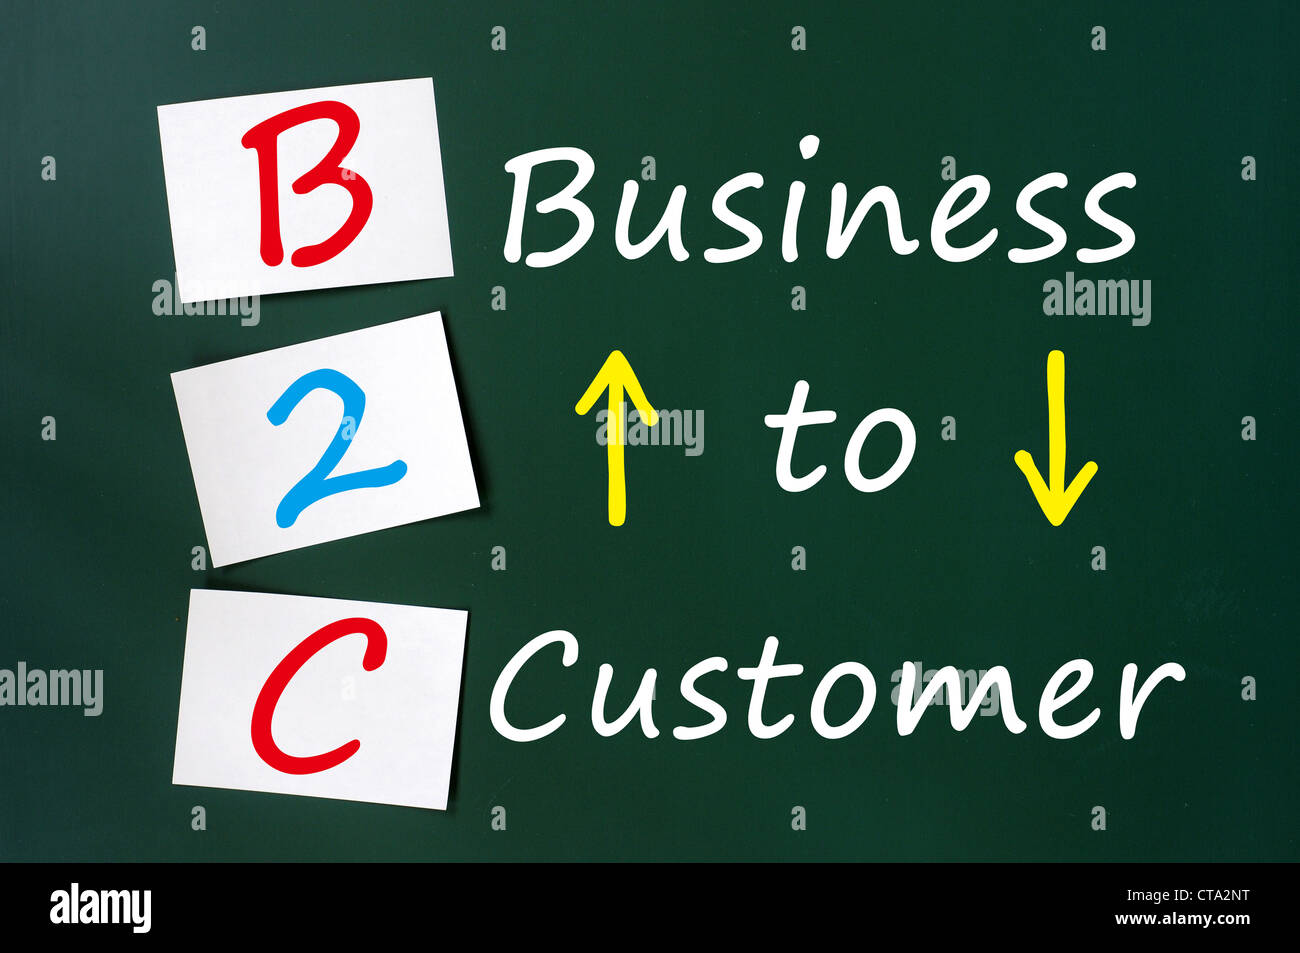 Acronym of B2C - Business to Customer written on a green chalkboard with sticky notes Stock Photo